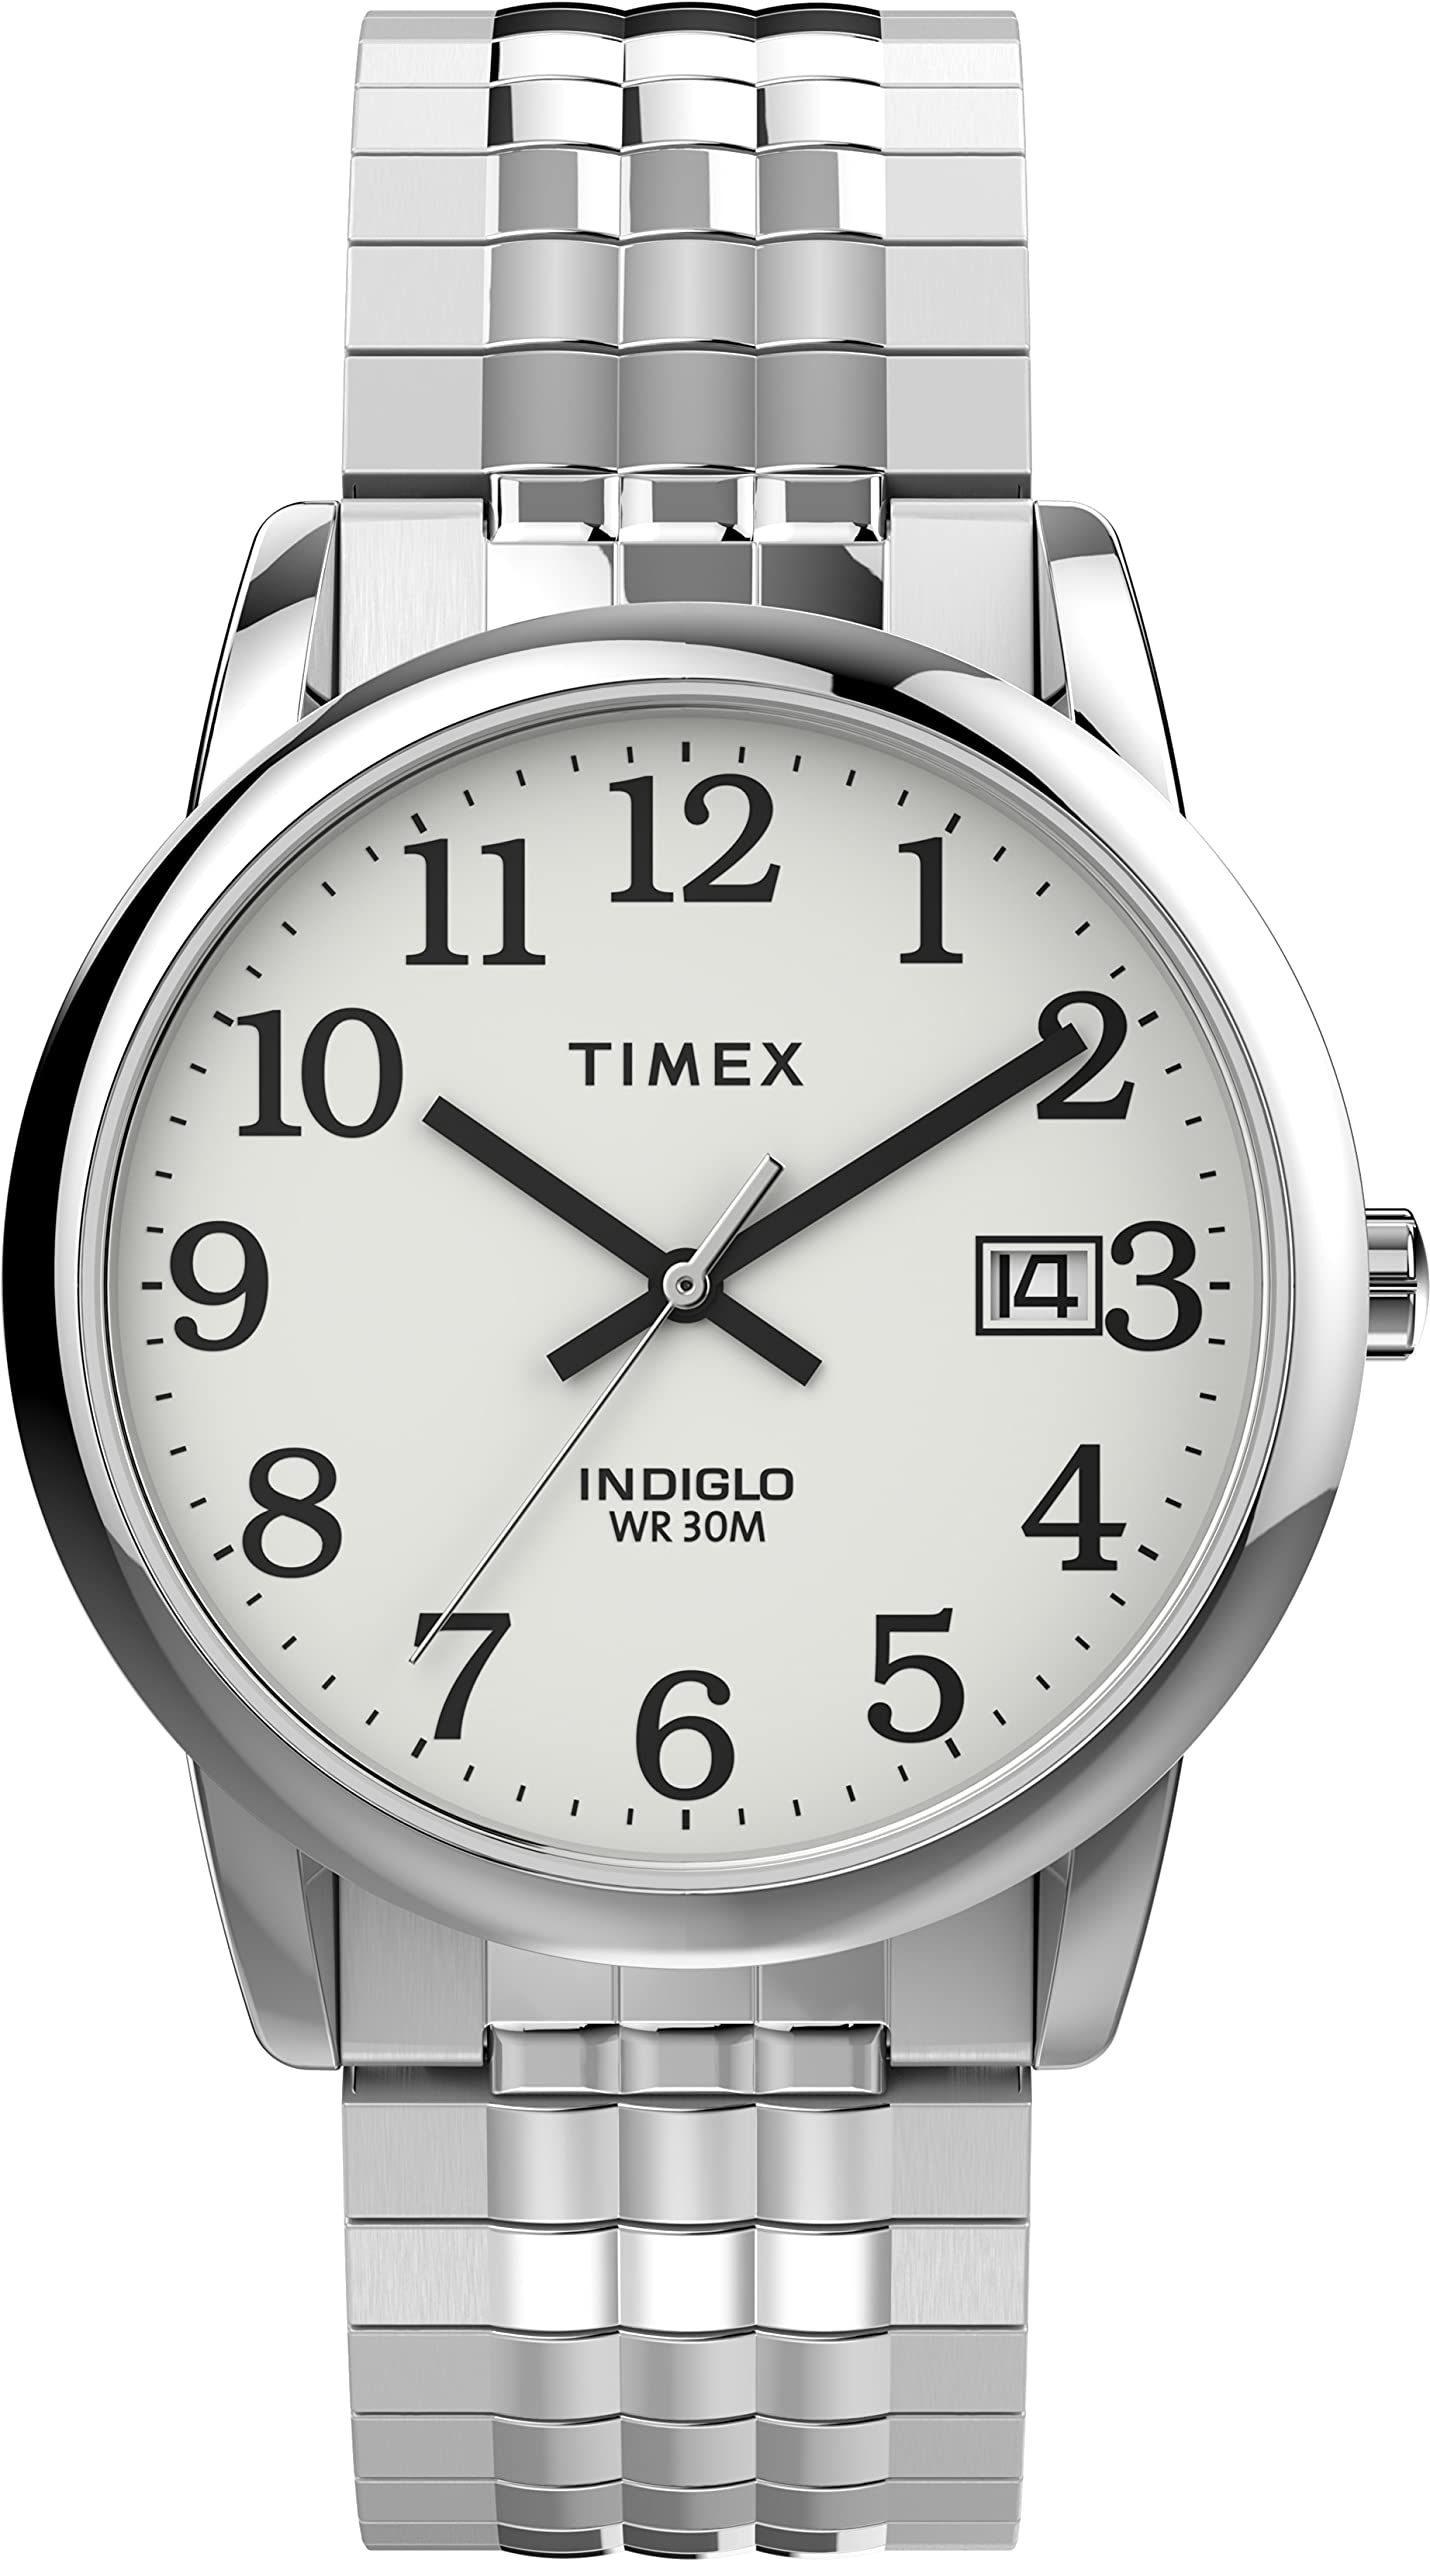 Timex Easy Reader Men's 35mm Expansion Band Watch with Perfect Fit TW2V05400, Silver-Tone/White, Bracelet